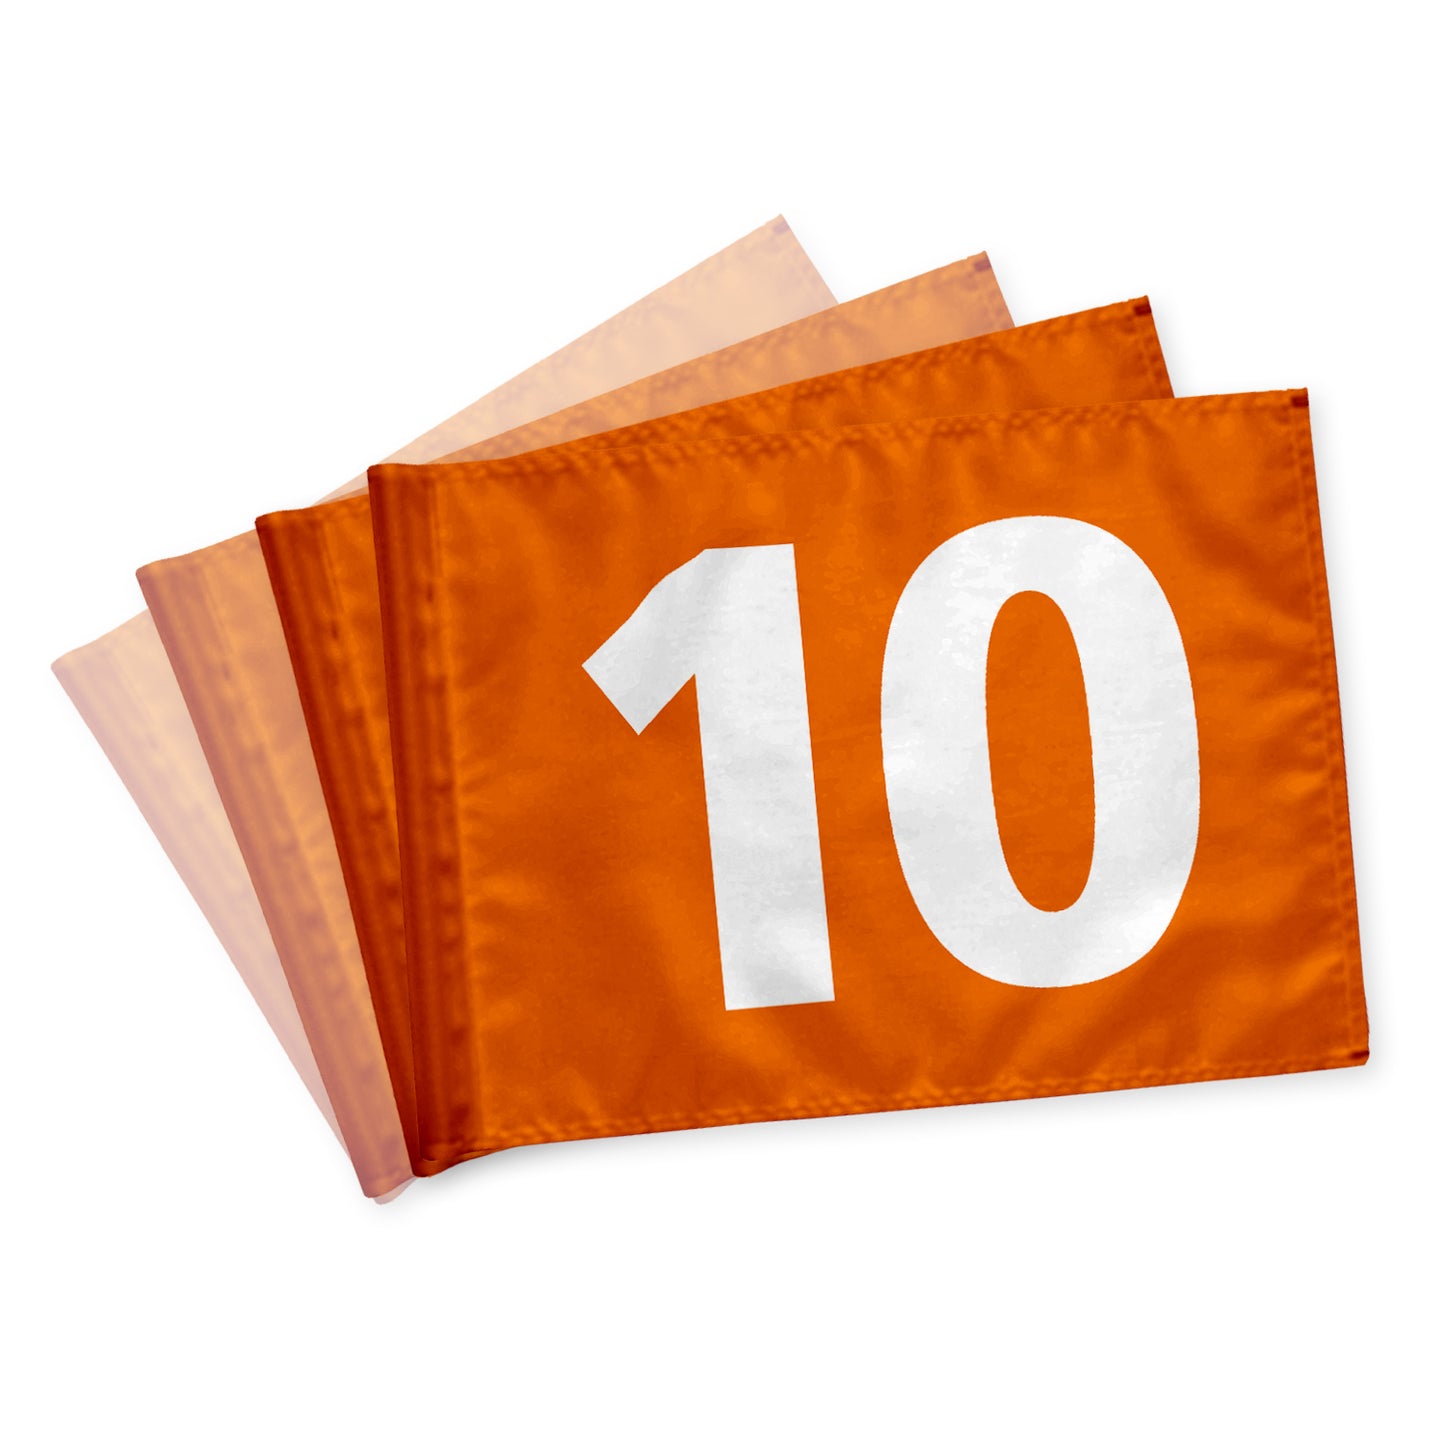 Puttinggreenflags 10-18, orange with white numbers, 200 gram fabric